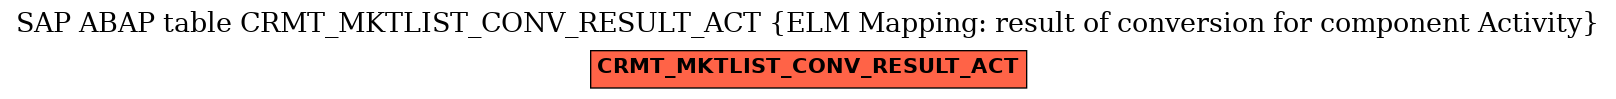 E-R Diagram for table CRMT_MKTLIST_CONV_RESULT_ACT (ELM Mapping: result of conversion for component Activity)